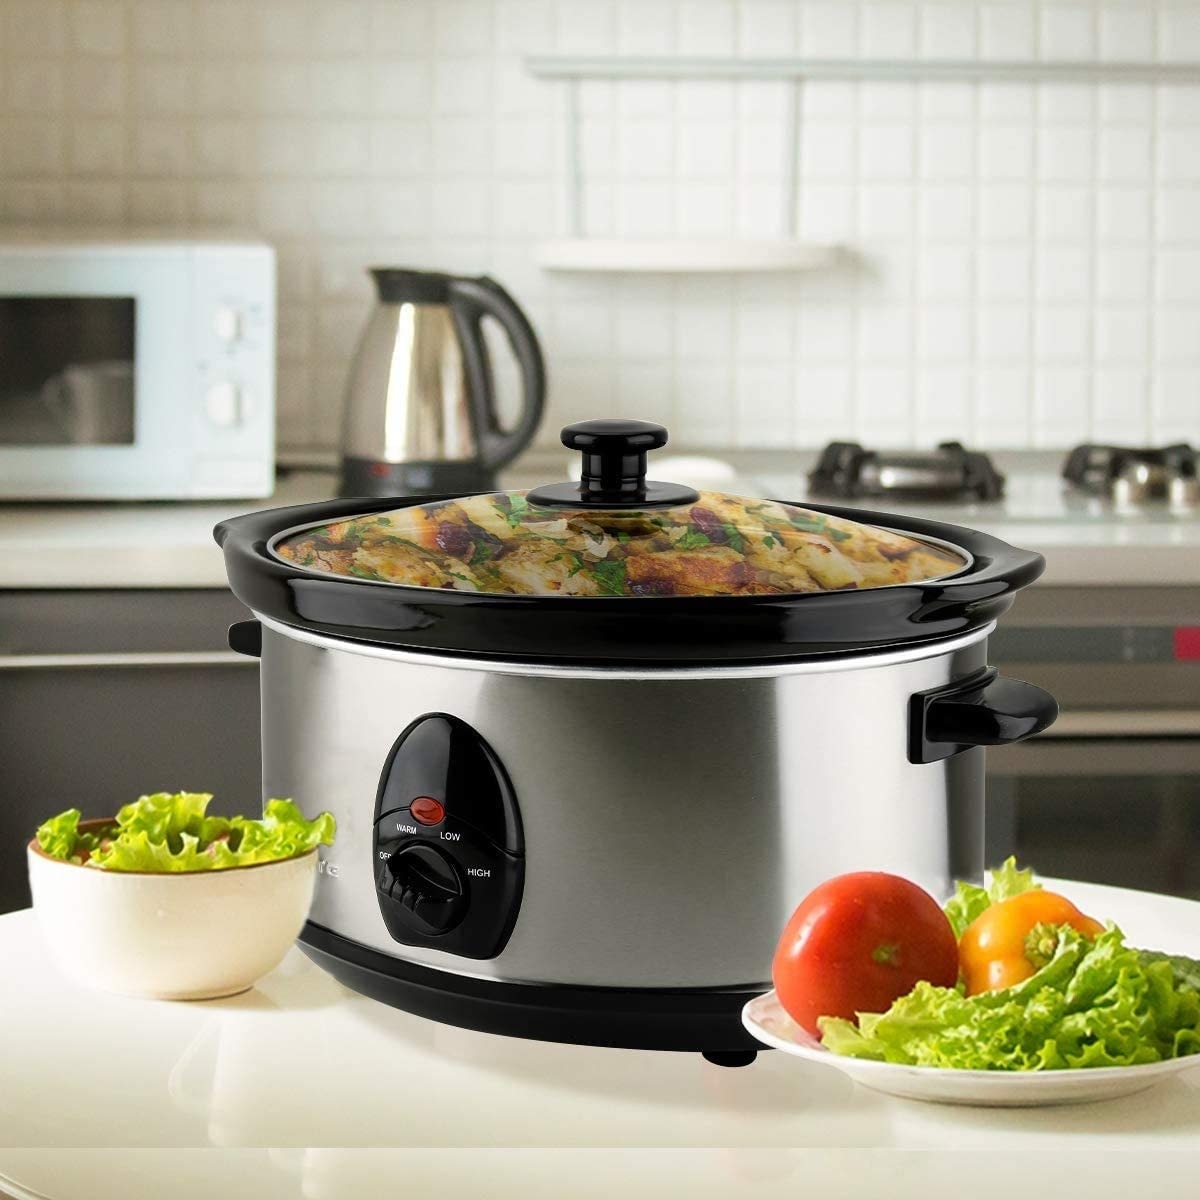 https://ak1.ostkcdn.com/images/products/is/images/direct/5401af4448d14df67922168f5ede537b6353b561/Ovente-Slow-Cooker-Crockpot-3.5-Liter-with-Removable-Ceramic-Pot-3-Cooking-Setting-and-Heat-Tempered-Glass-Lid%2C-SLO35-Series.jpg